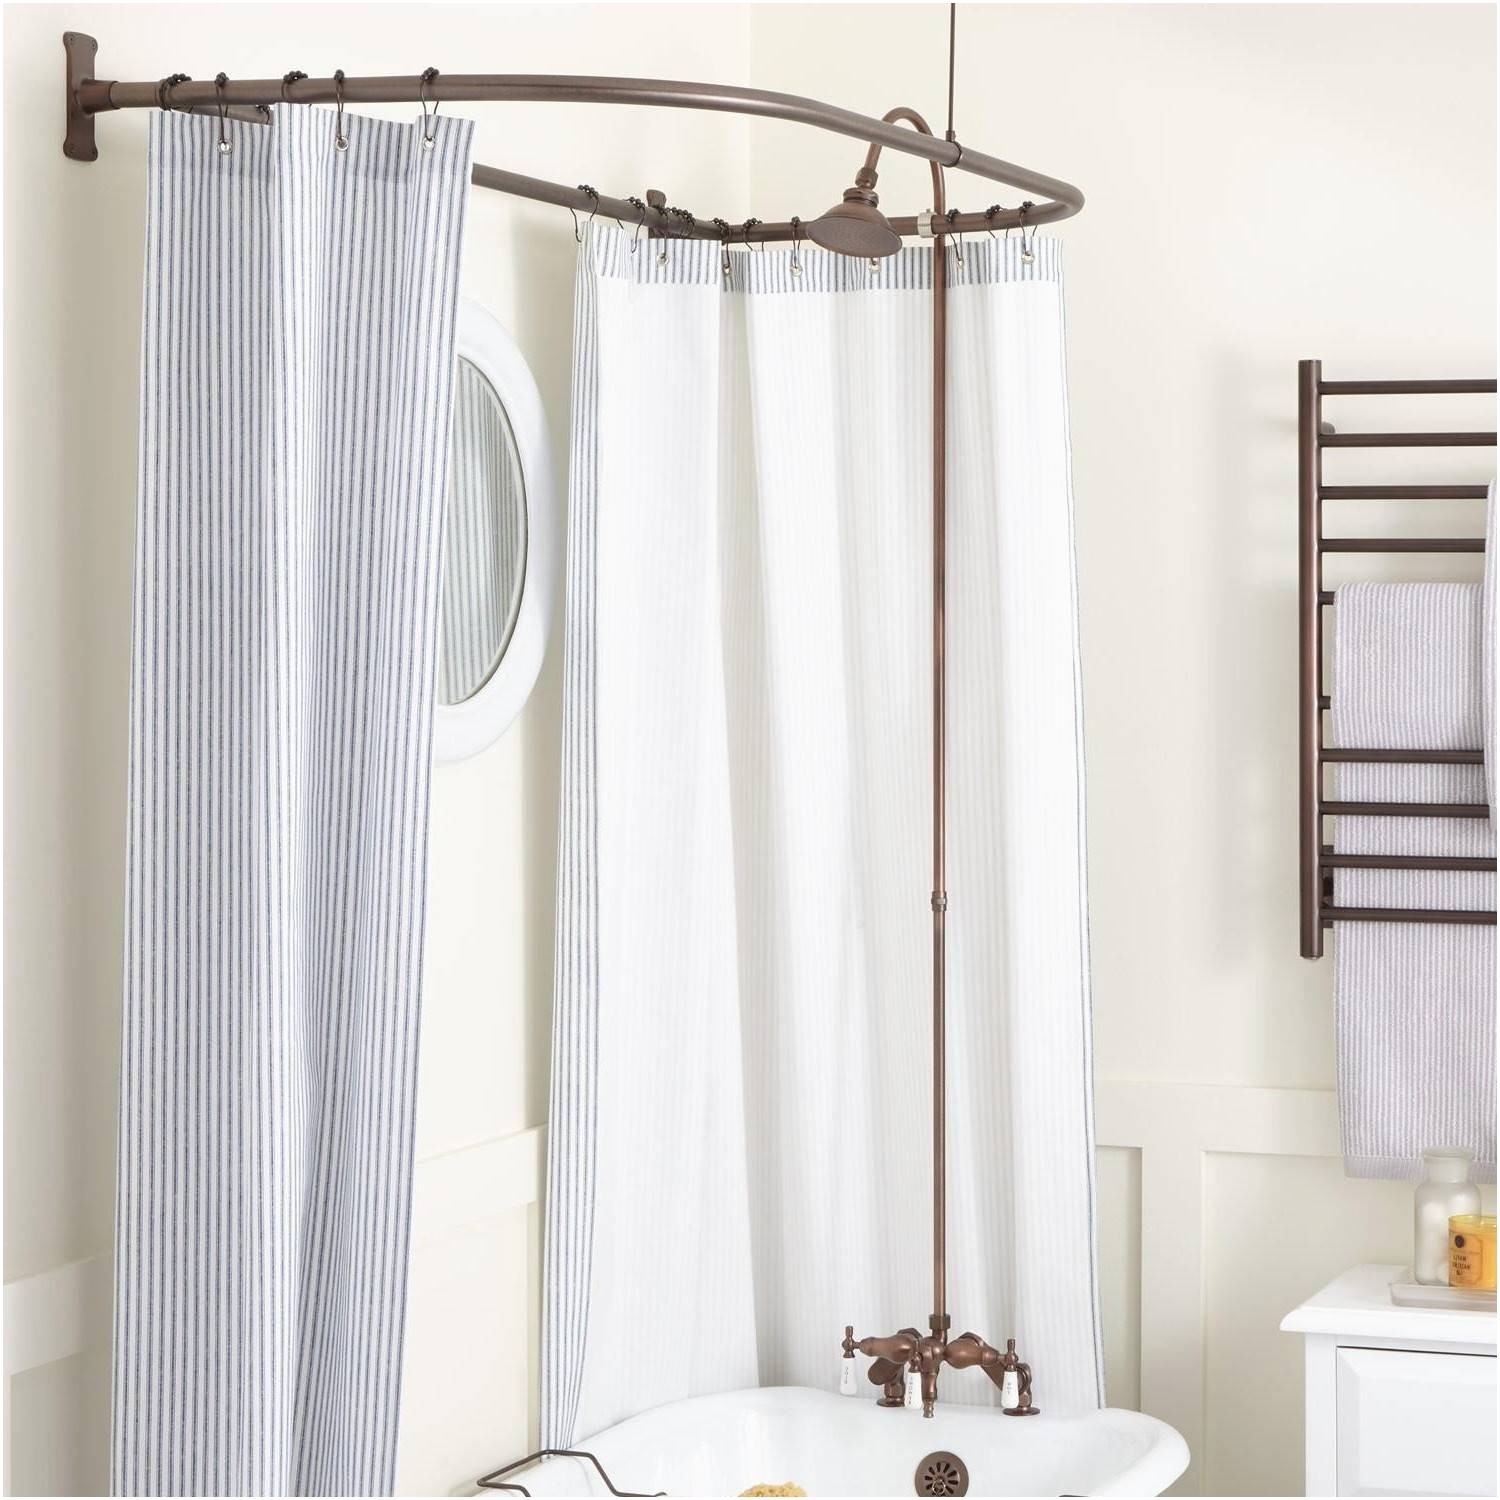 Shower Curtain for Transfer Chair Home Design Beautiful Shower Curtains Elegant Window Curtains Long